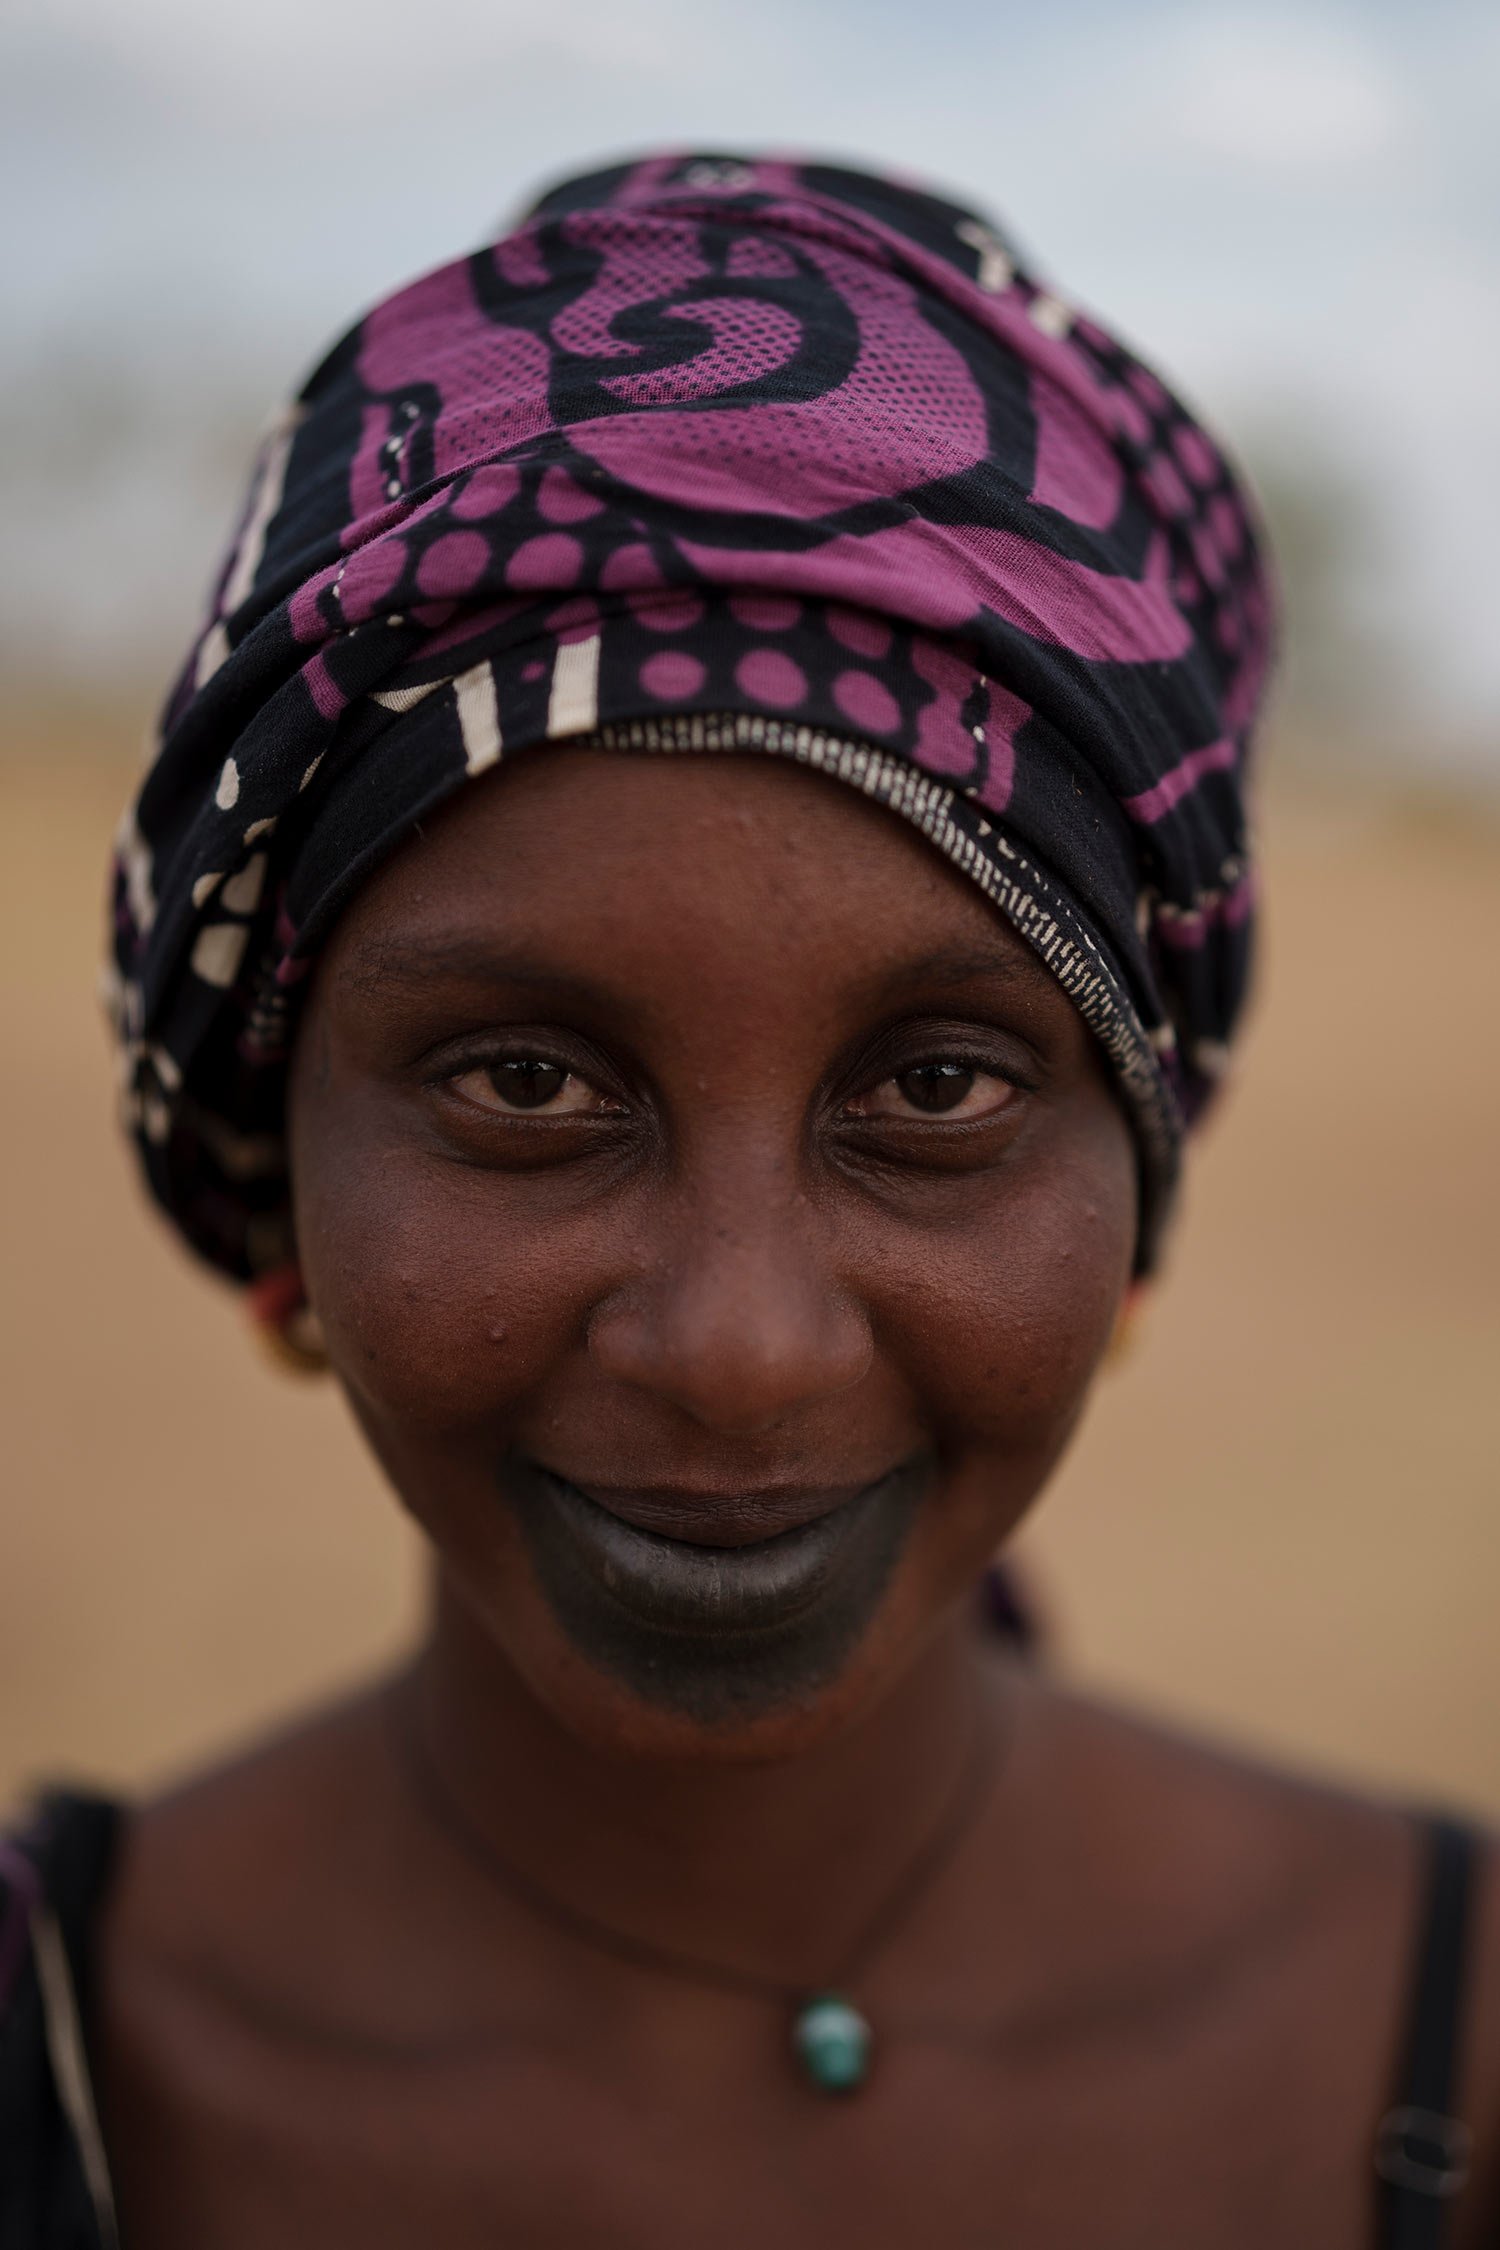  Houraye Ndiaye, 20, stands for a portrait in the village of Dendoudy Dow, in the Matam region of Senegal, Monday, April 17, 2023. Ndiaye travels with her husband and their two-year-old girl, along with her parents and two other siblings. She says th